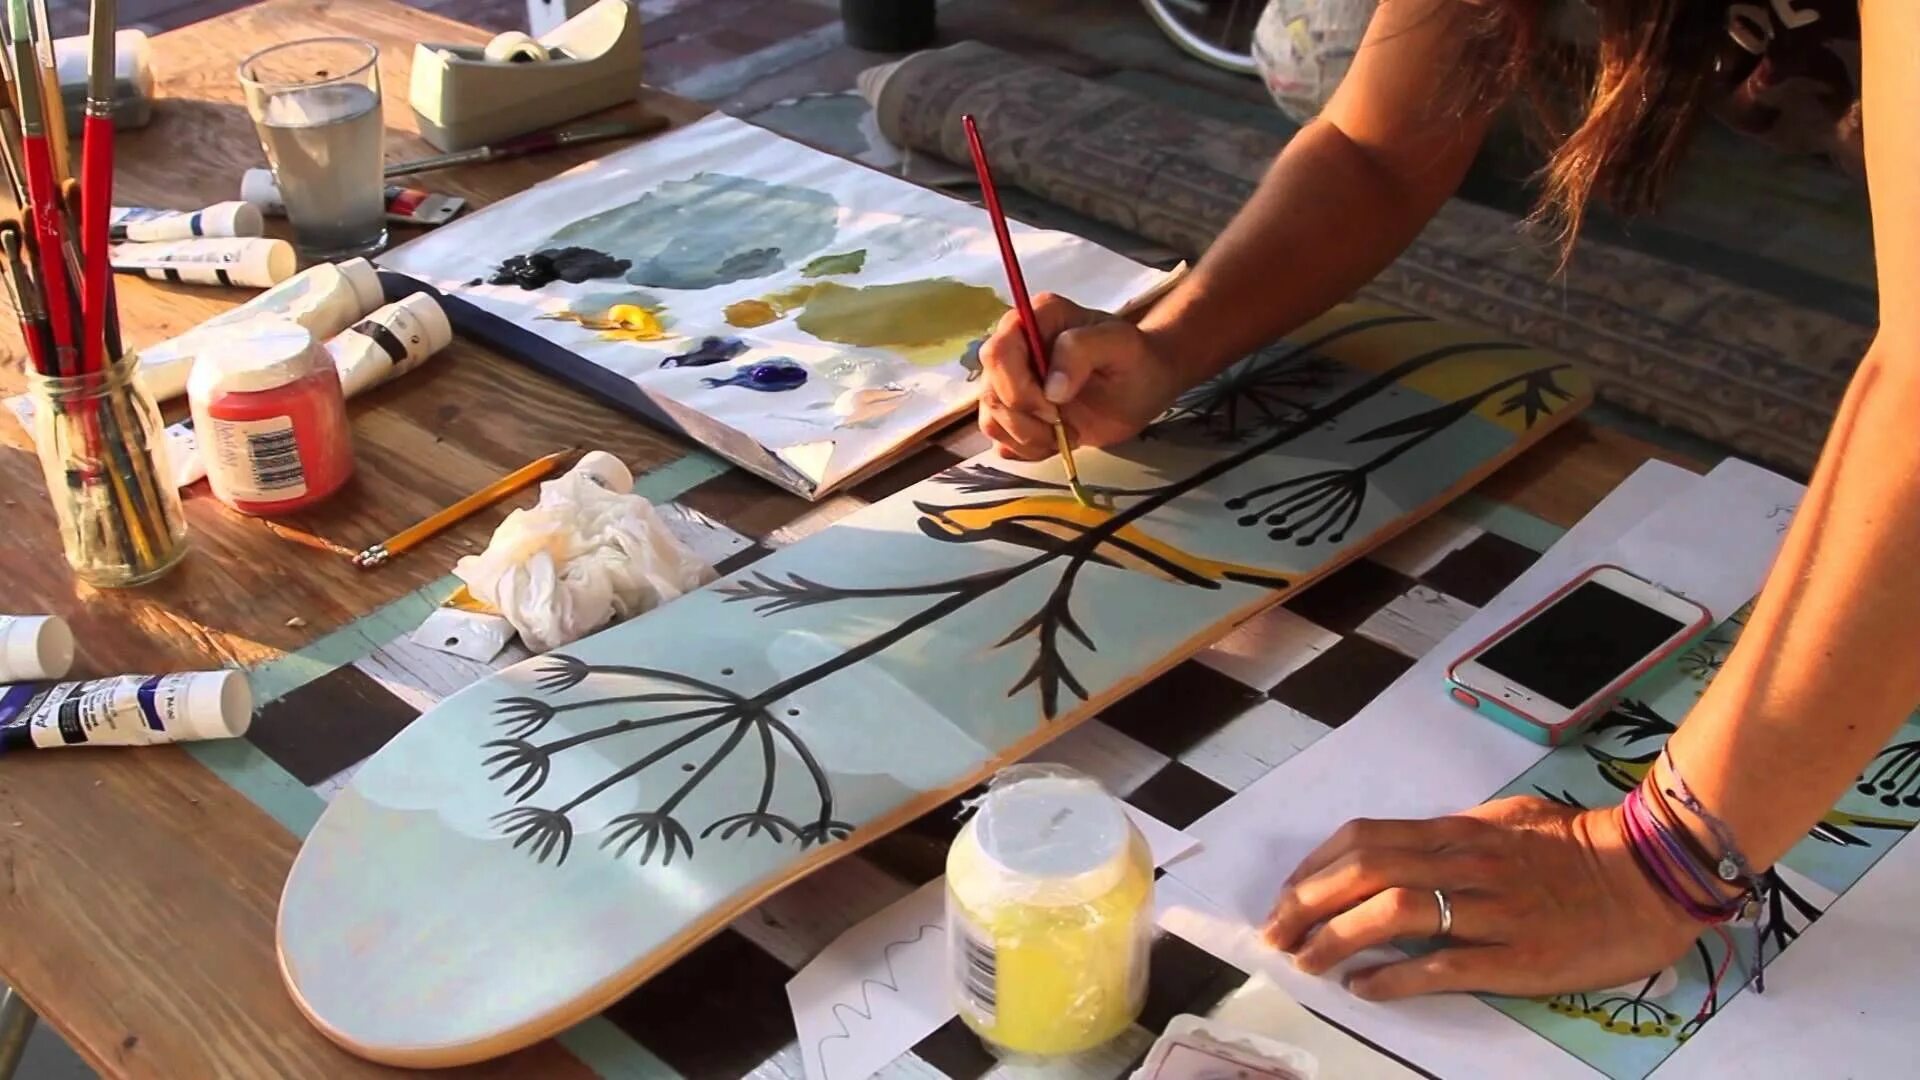 Skate Deck Painting. Painting course. Collecting stamps, Painting, Skateboarding. Paint on Painting Shovel. Talented artist